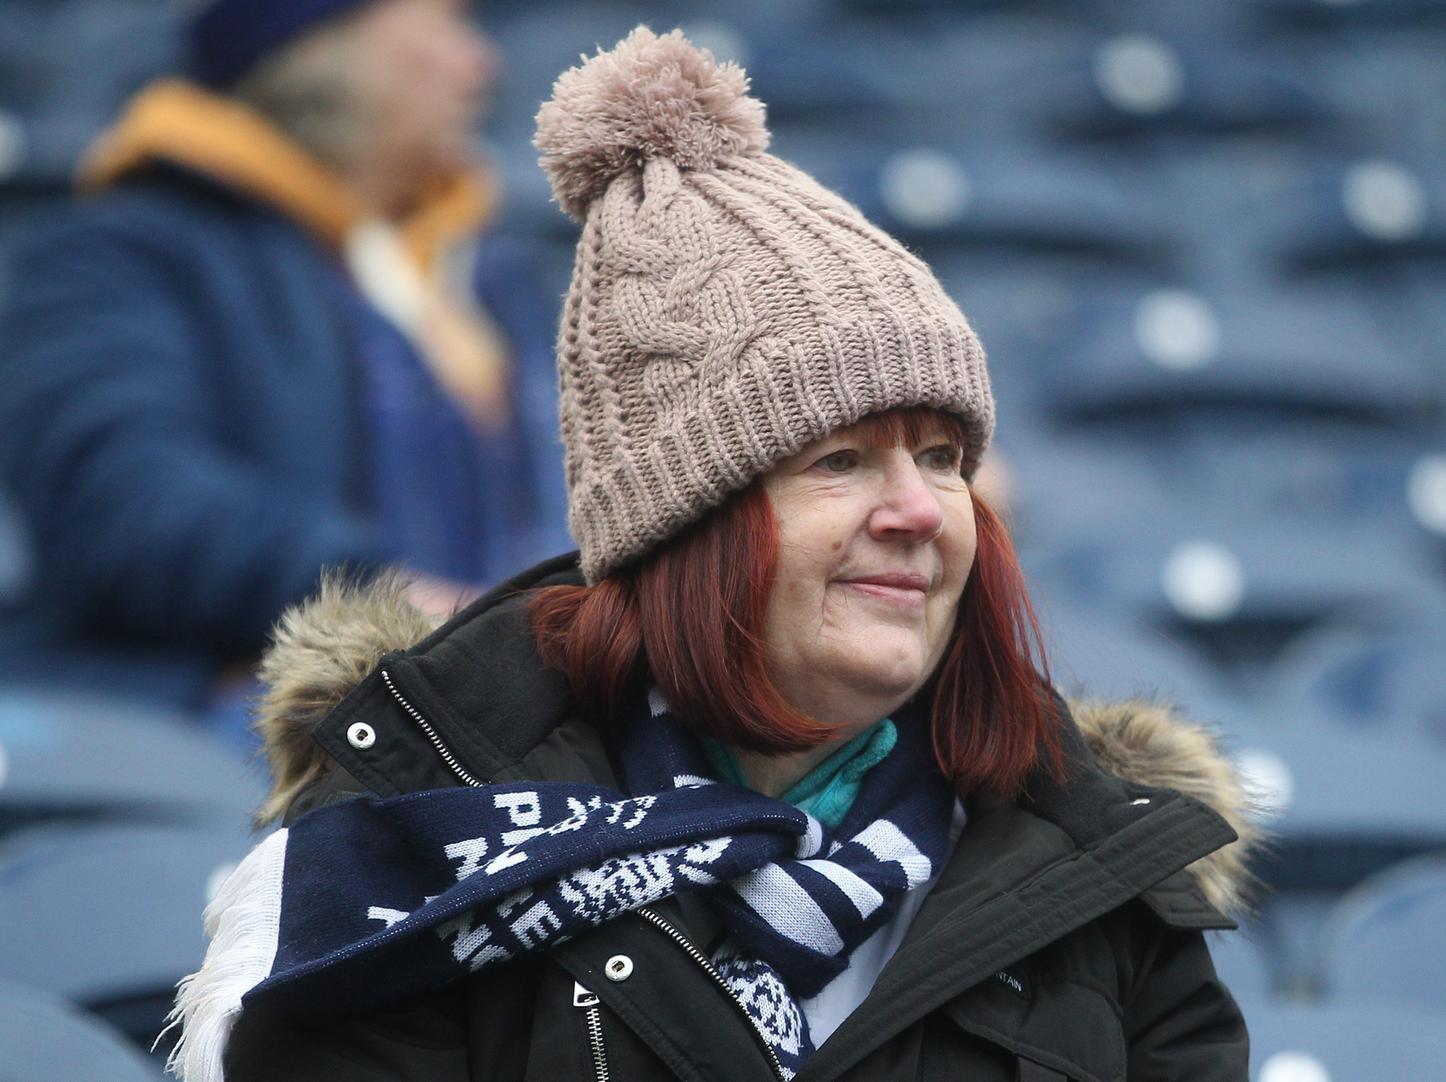 One North End fan sits awaiting the players at Deepdale.